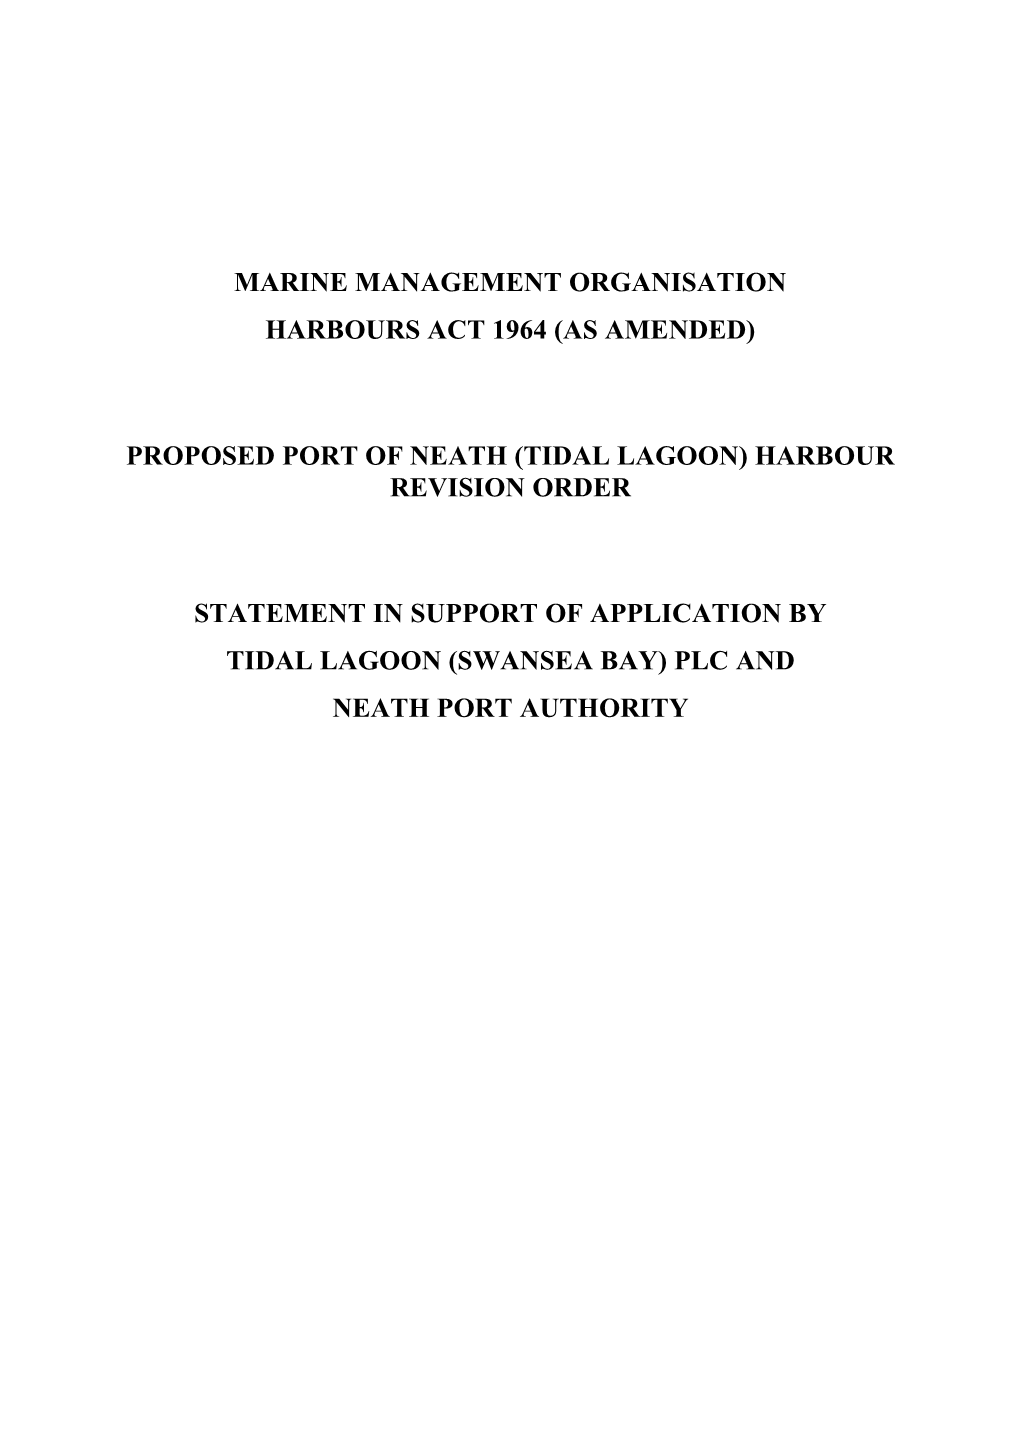 Proposed Port of Neath (Tidal Lagoon) Harbour Revision Order